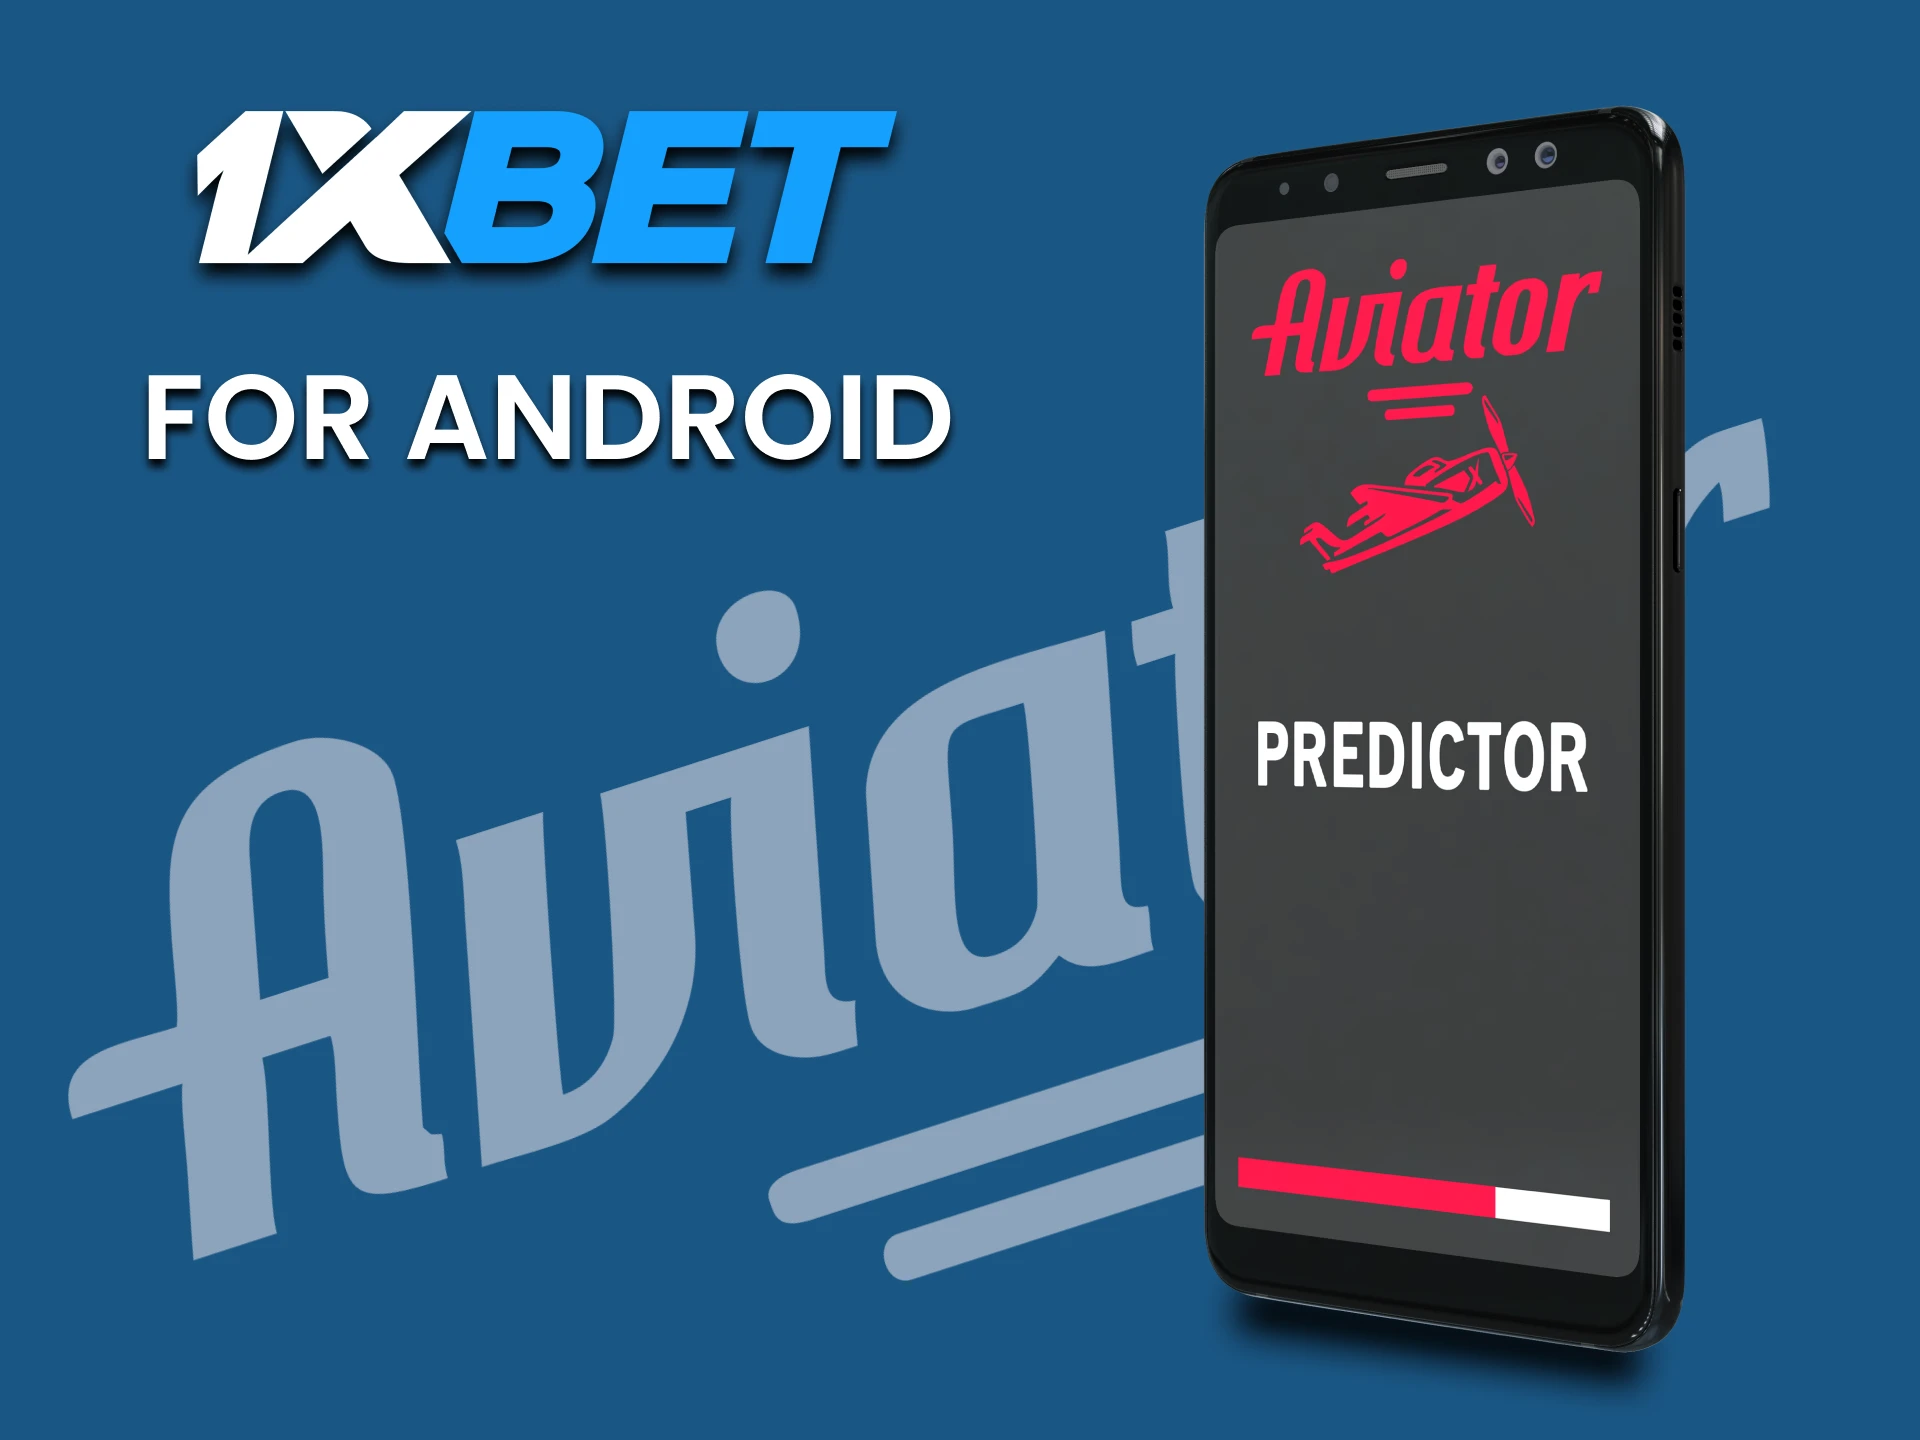 You can install Predictor for Aviator by downloading the application on your Android device.